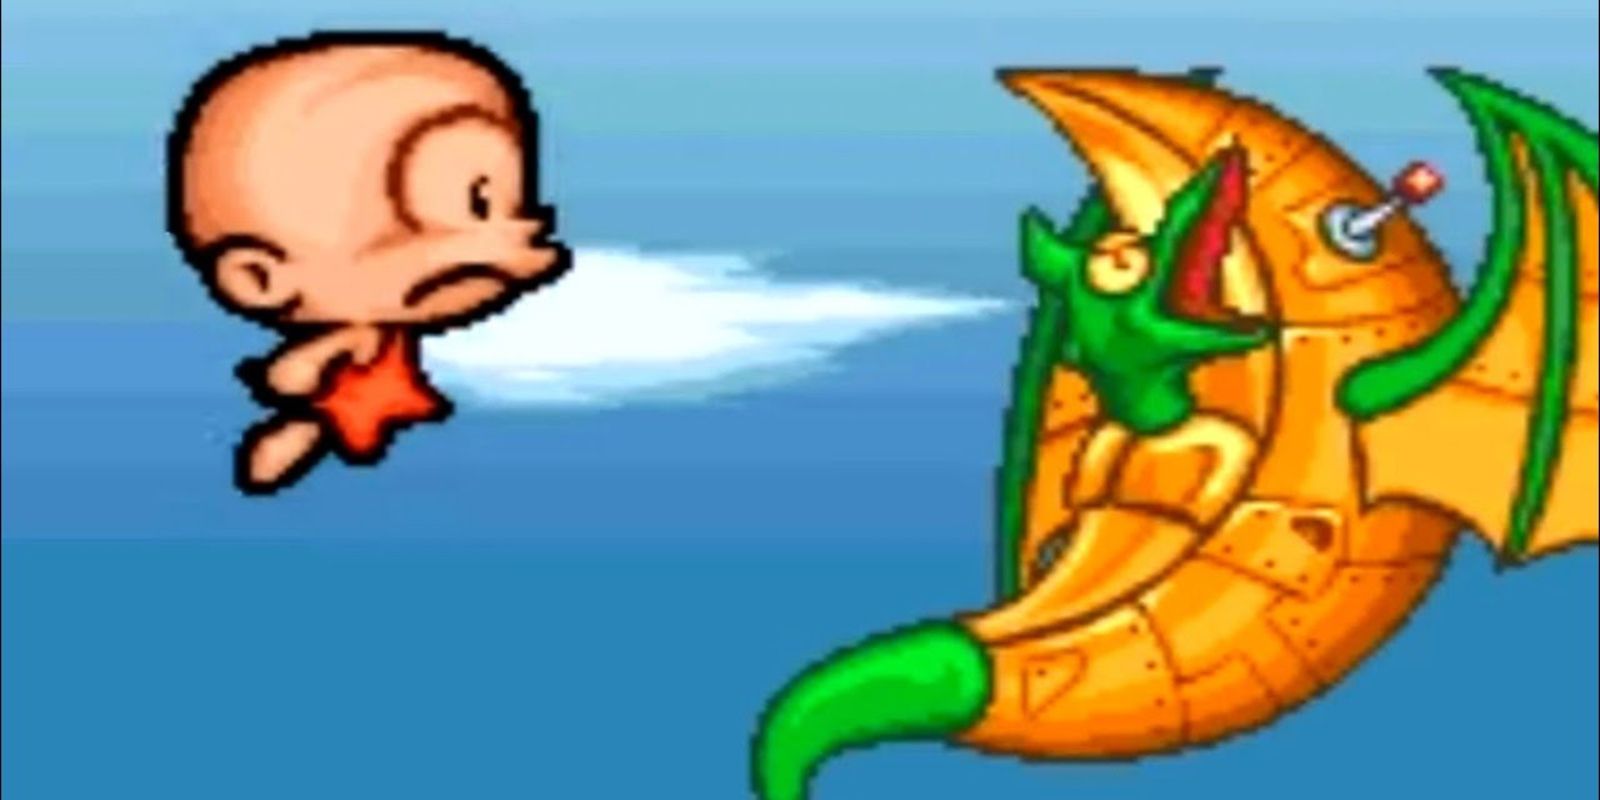 Gex The Gecko & 9 Other Nostalgic Video Game Mascots Fans Miss